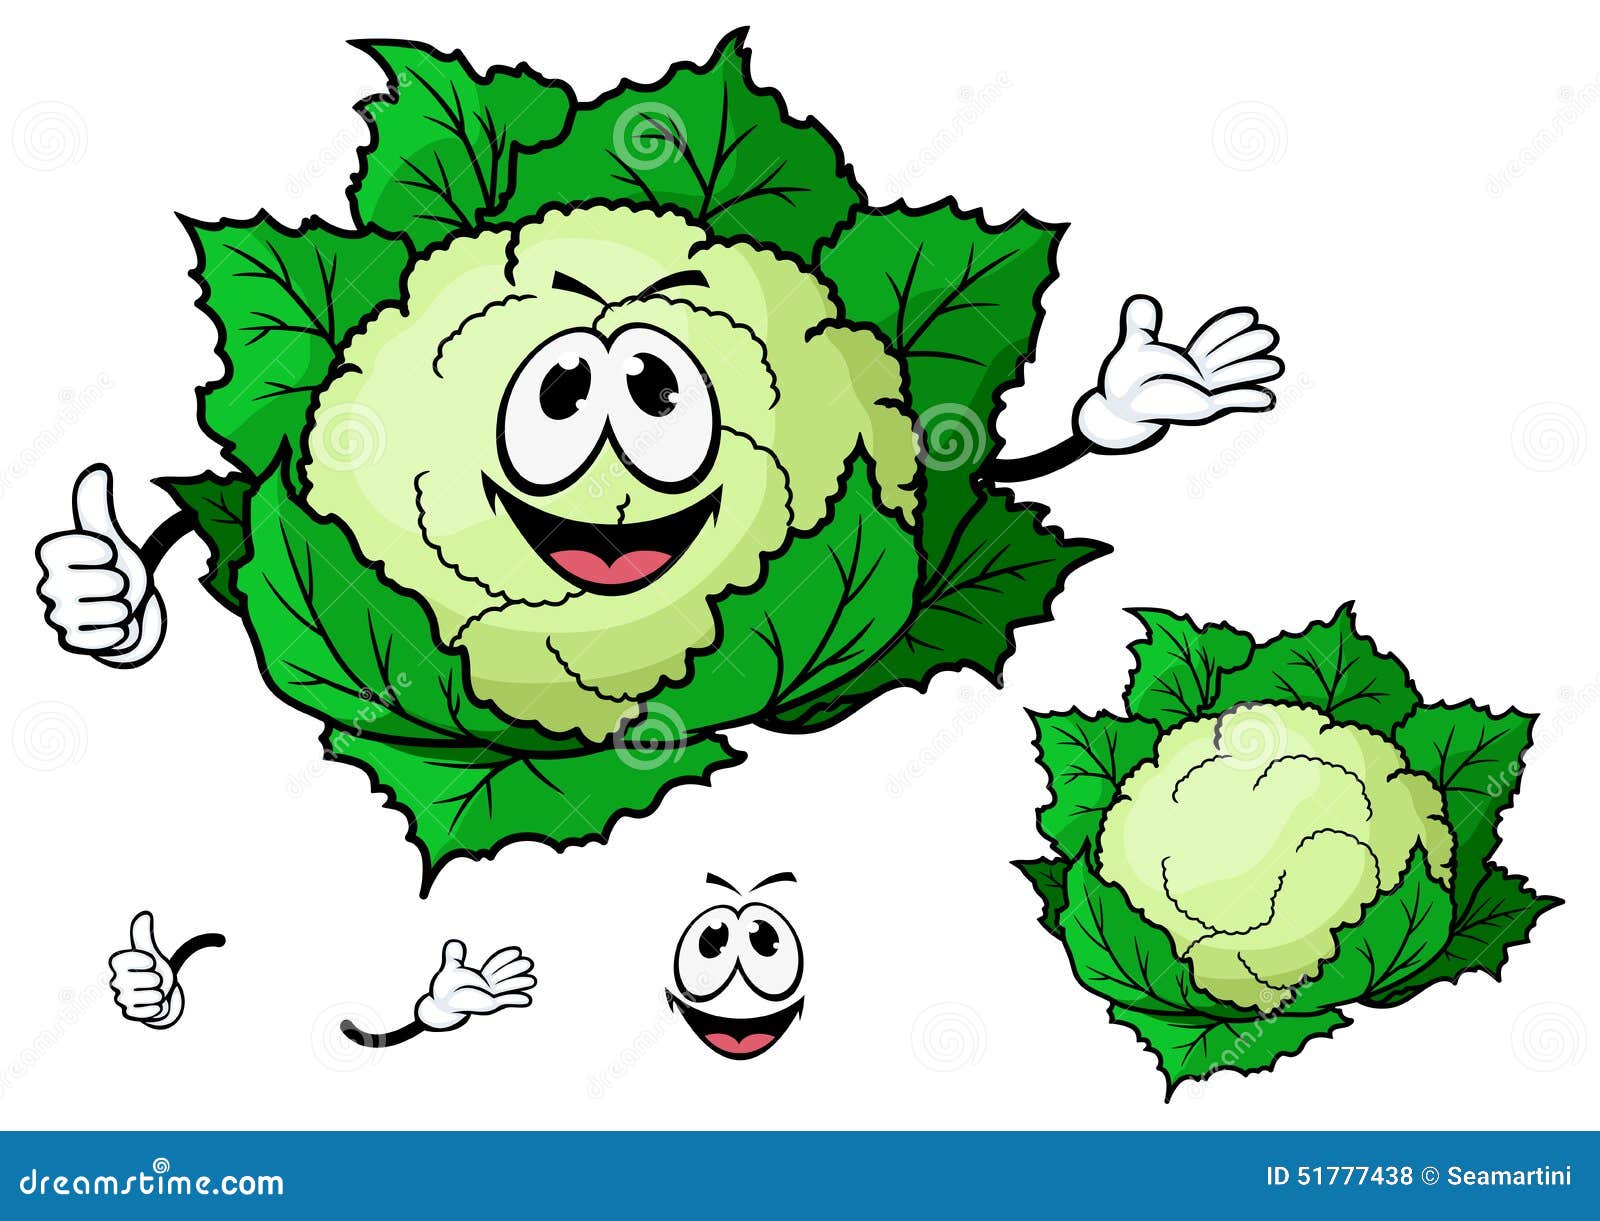 Happy Smiling Cartoon Cauliflower Vegetable Stock Vector - Illustration of  meal, natural: 51777438